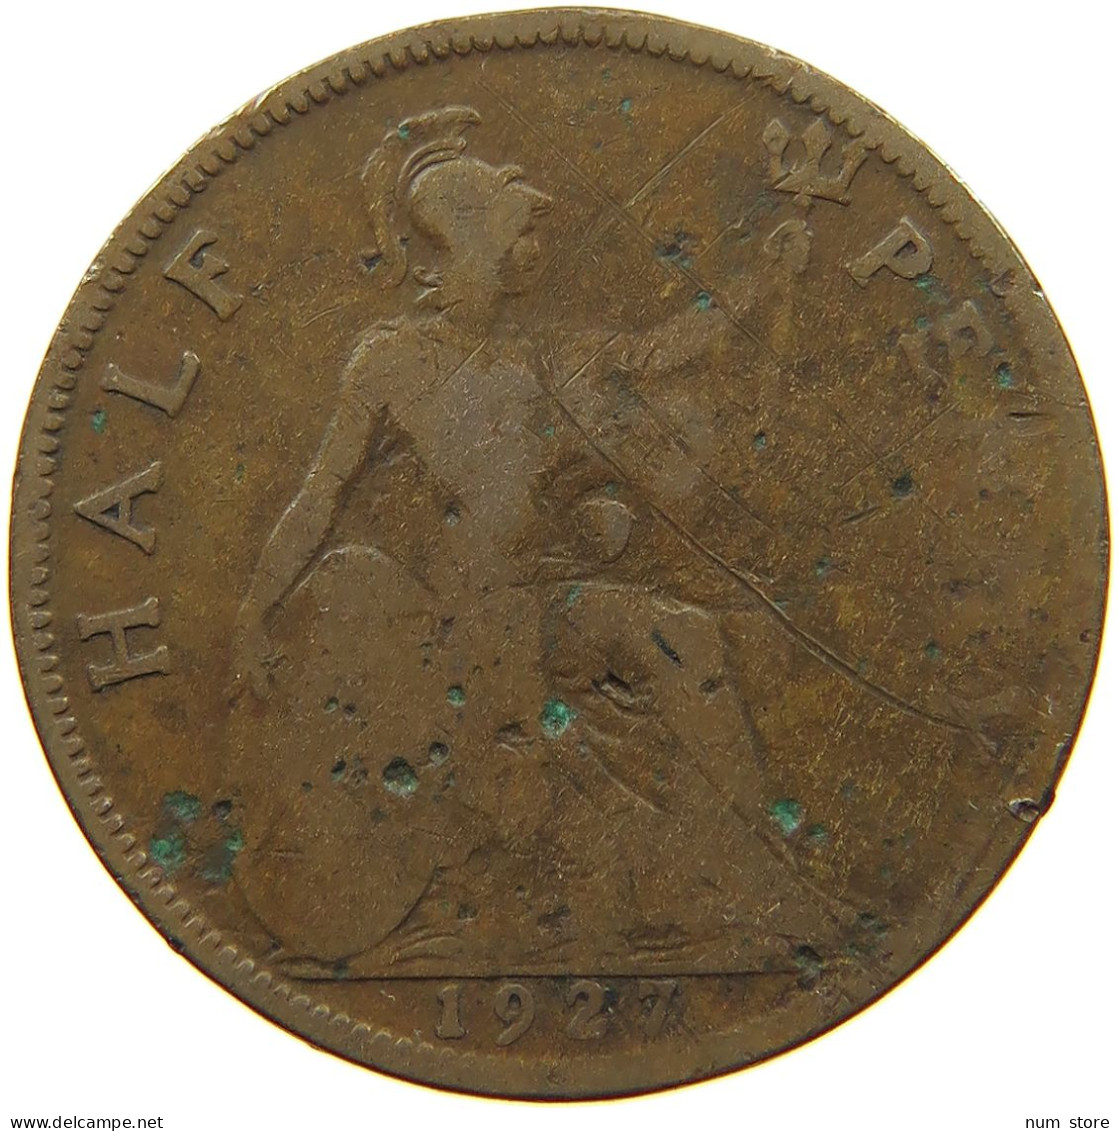 GREAT BRITAIN HALFPENNY 1927 George V. (1910-1936) COUNTERMARKED 44 #a039 0567 - C. 1/2 Penny